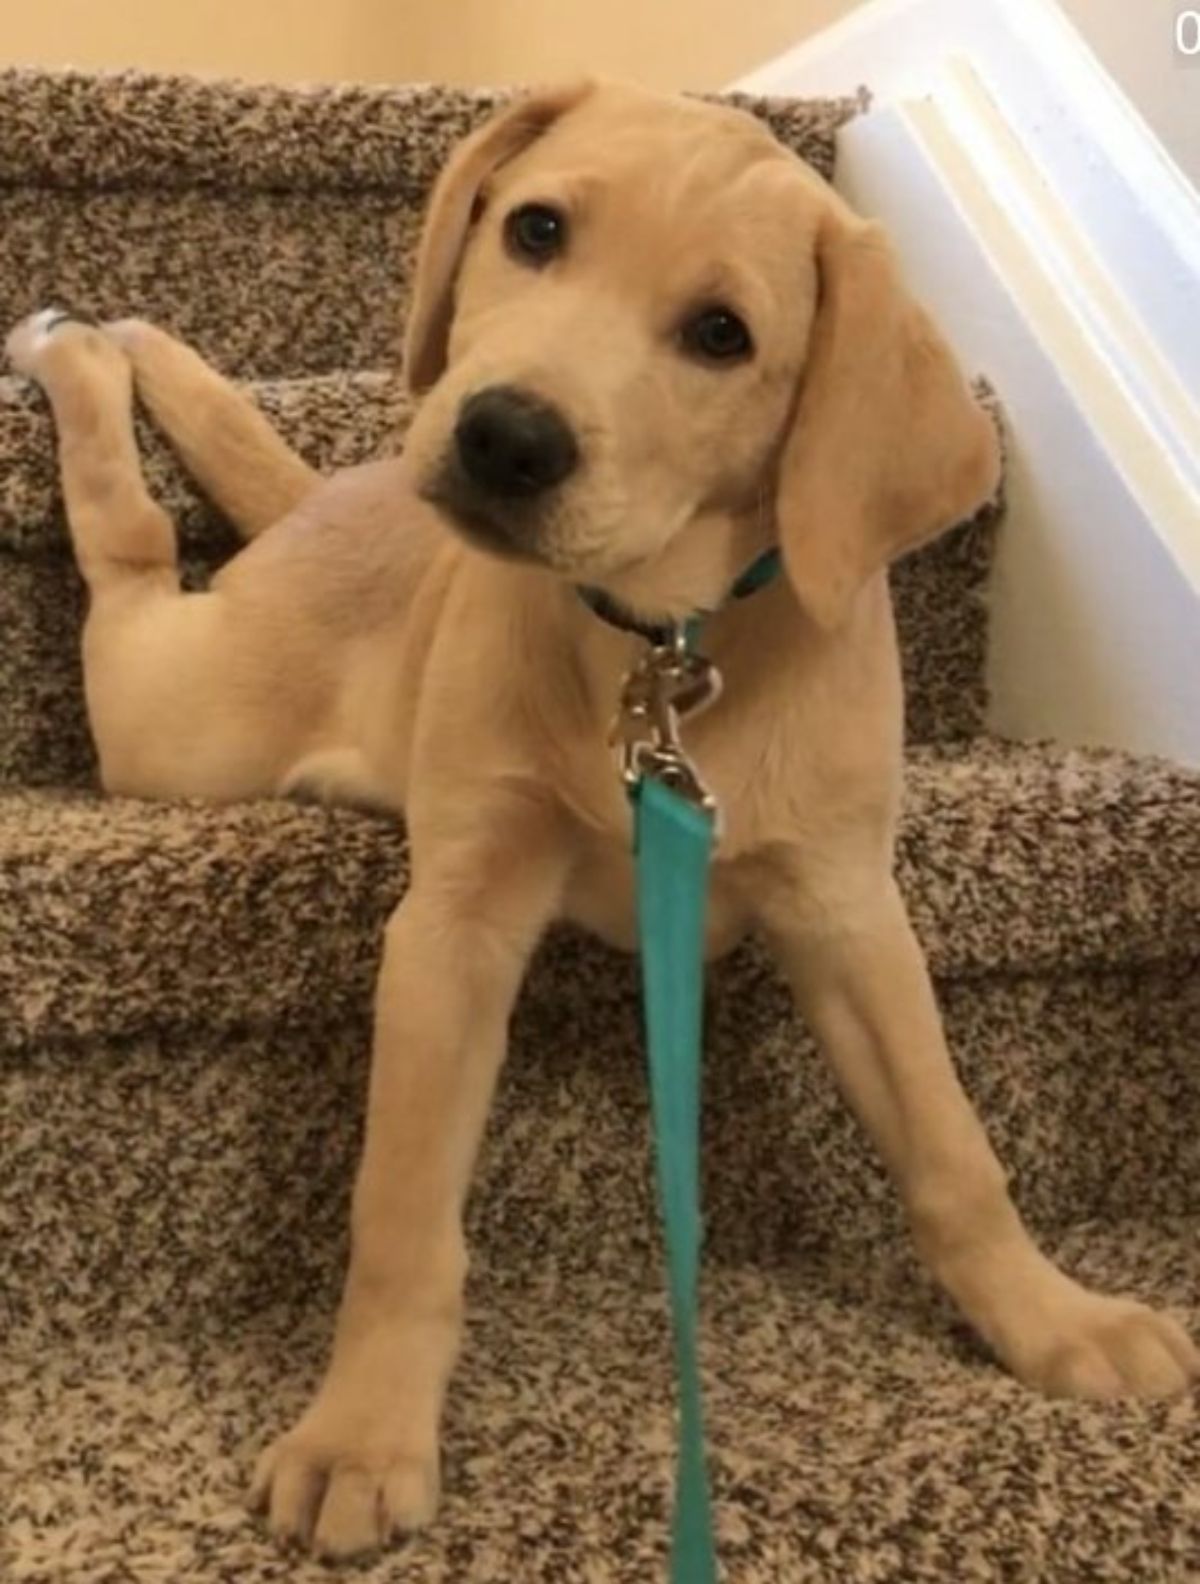 golden retriever puppy laying on brown stairs with the front legs on the bottom stair and the back legs draping behind the puppy